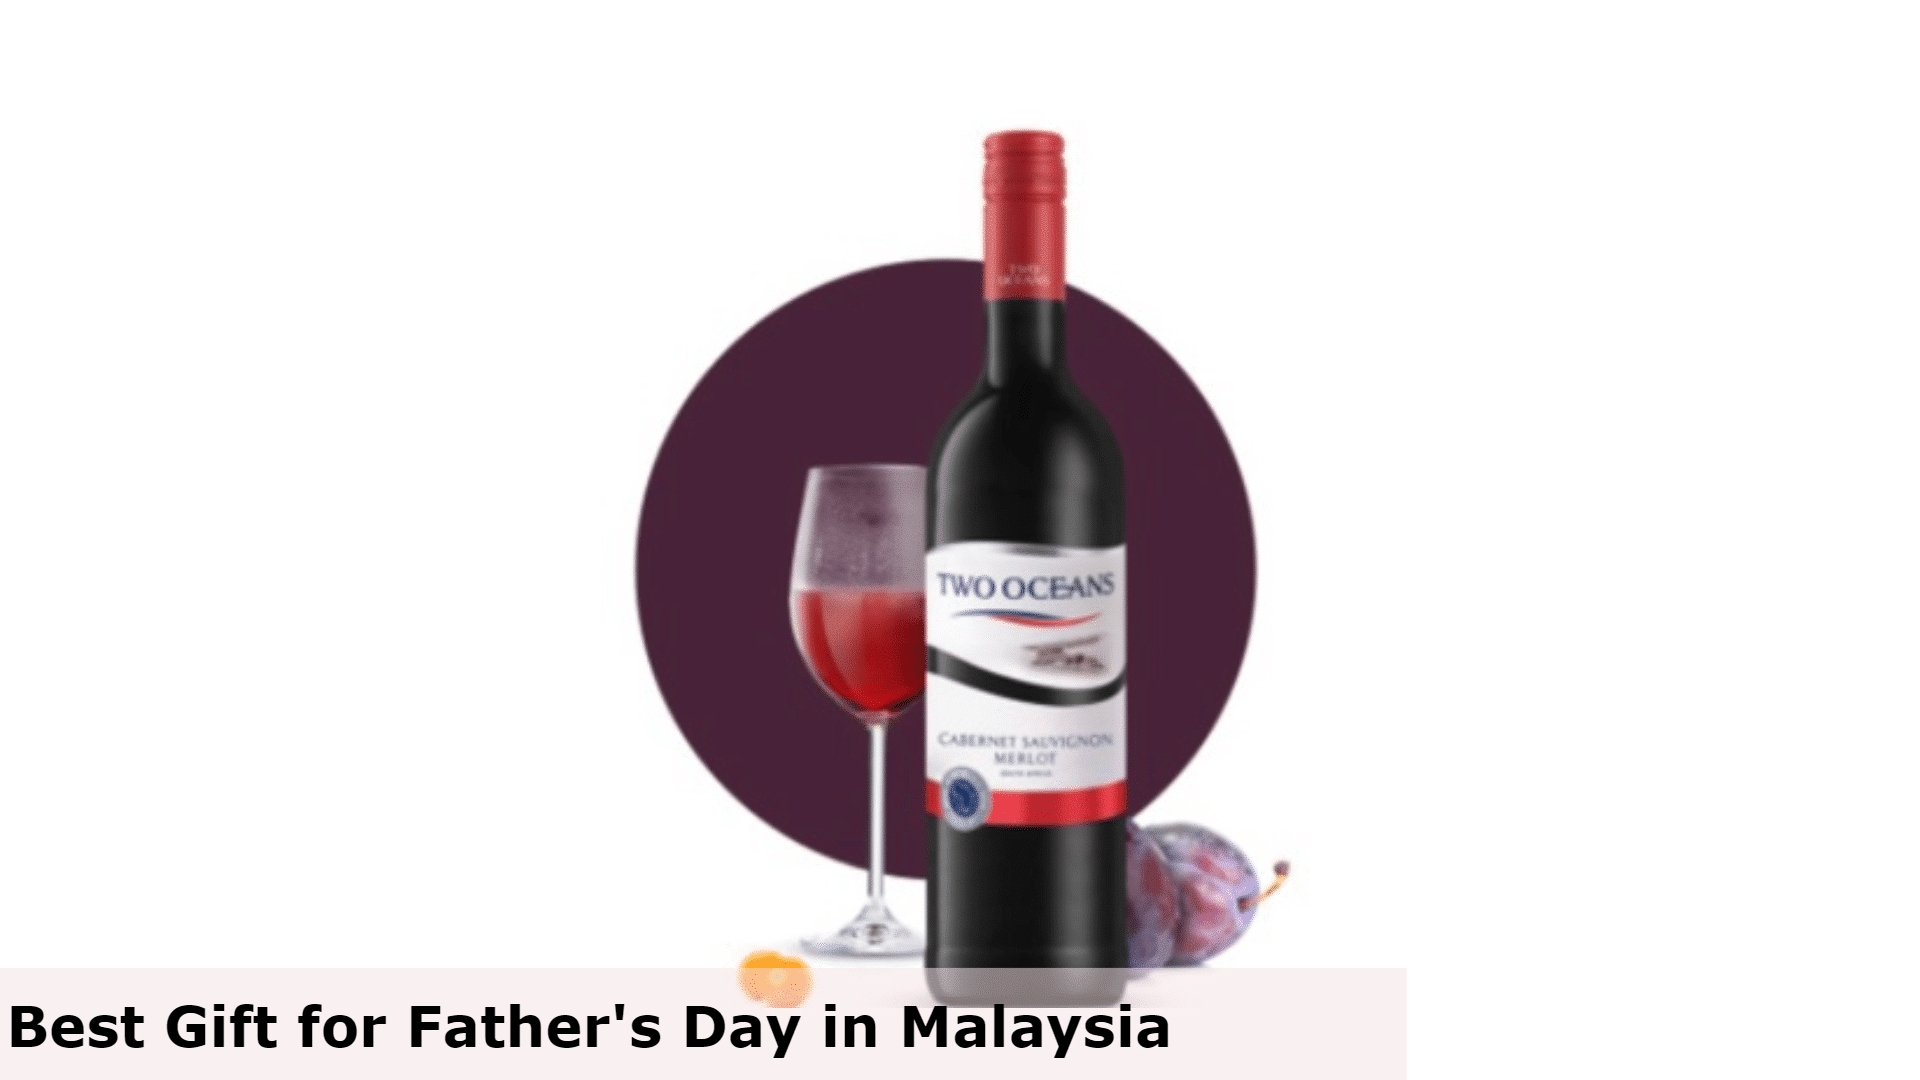 Wine - Best Gift for Father's Day in Malaysia, Best gift for Father's Day Malaysia, Best Father's Day Gifts for Dad, What do dads want for Father's Day in Malaysia?, What is a good cheap gift for Father's Day in Malaysia?, Do you give gifts on Father's Day in Malaysia?, gifts for dad who wants nothing, simple father's day gift ideas, father's day gift ideas 2022, father's day gift ideas during covid, father's day gift ideas from daughter, unique gifts for dad, father's day gift ideas from wife, fathers day gifts from son, What buy for a dad that doesn't want anything?, What to get a dad that is hard to buy for?, What should I get my boring dad for Christmas?, What gifts do dads like?,